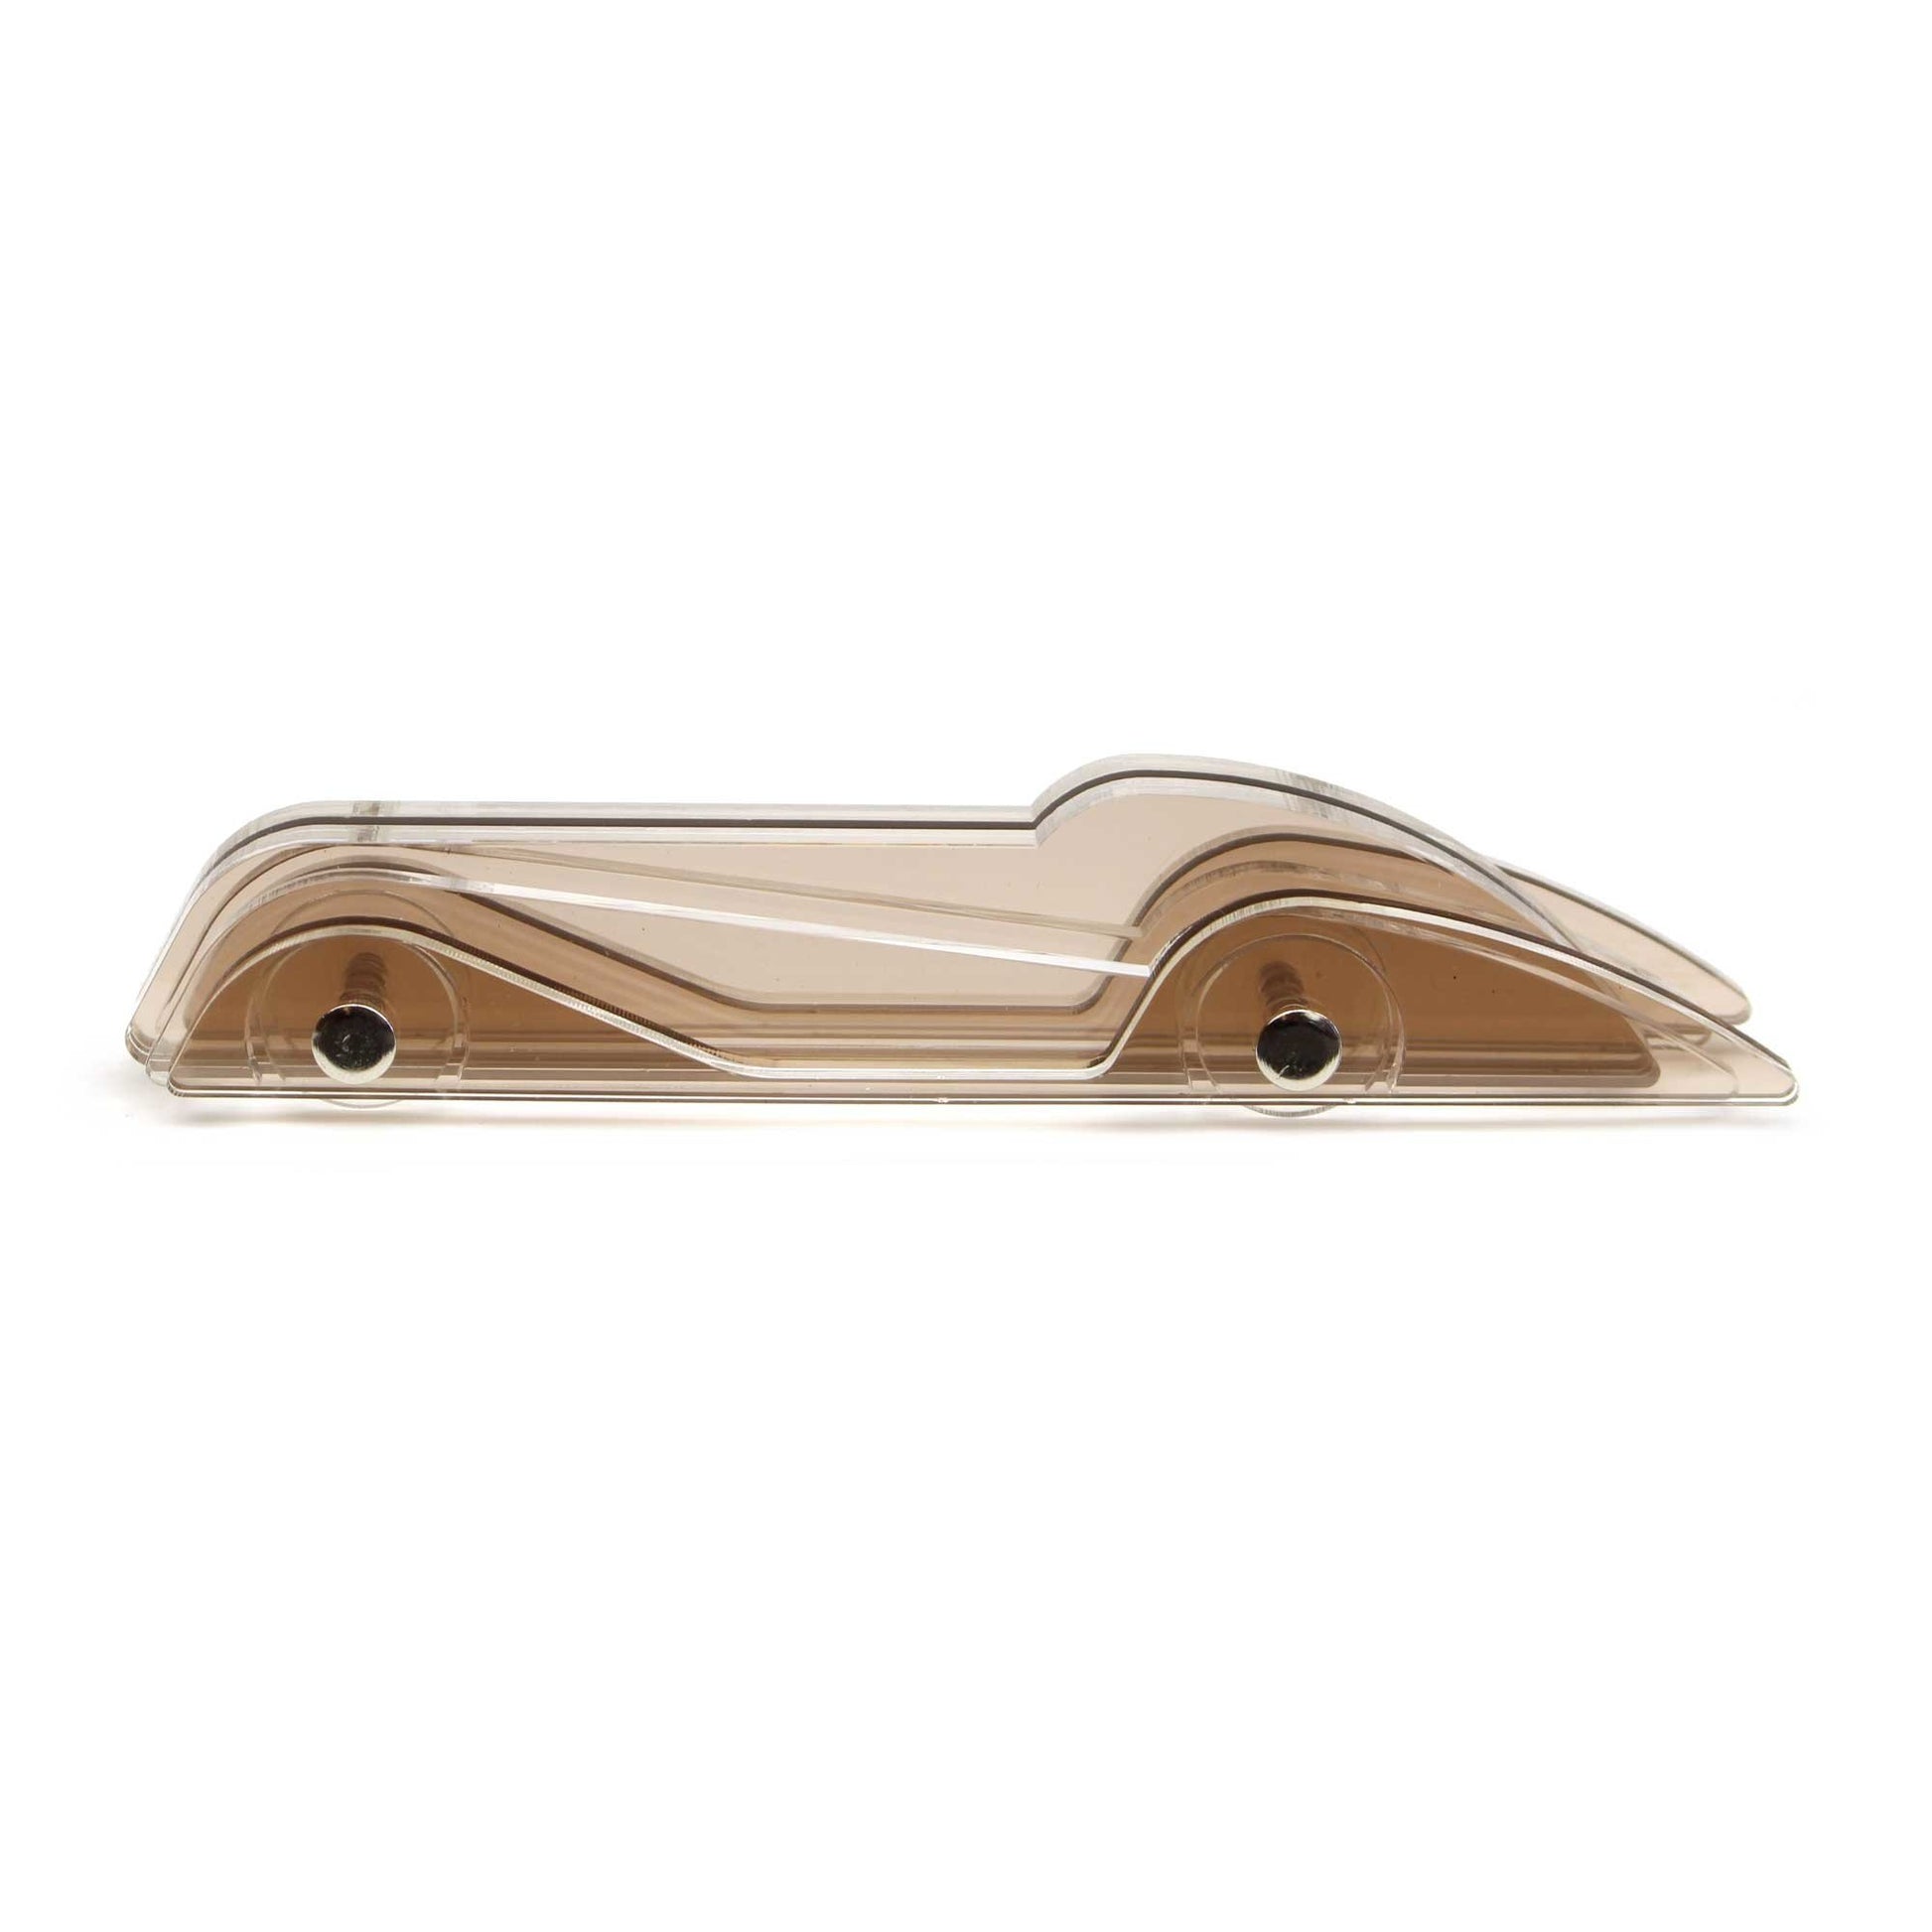 Lucite Car Small No3 by Ikonic Toys - Wood Wood Toys Canada's Favourite Montessori Toy Store